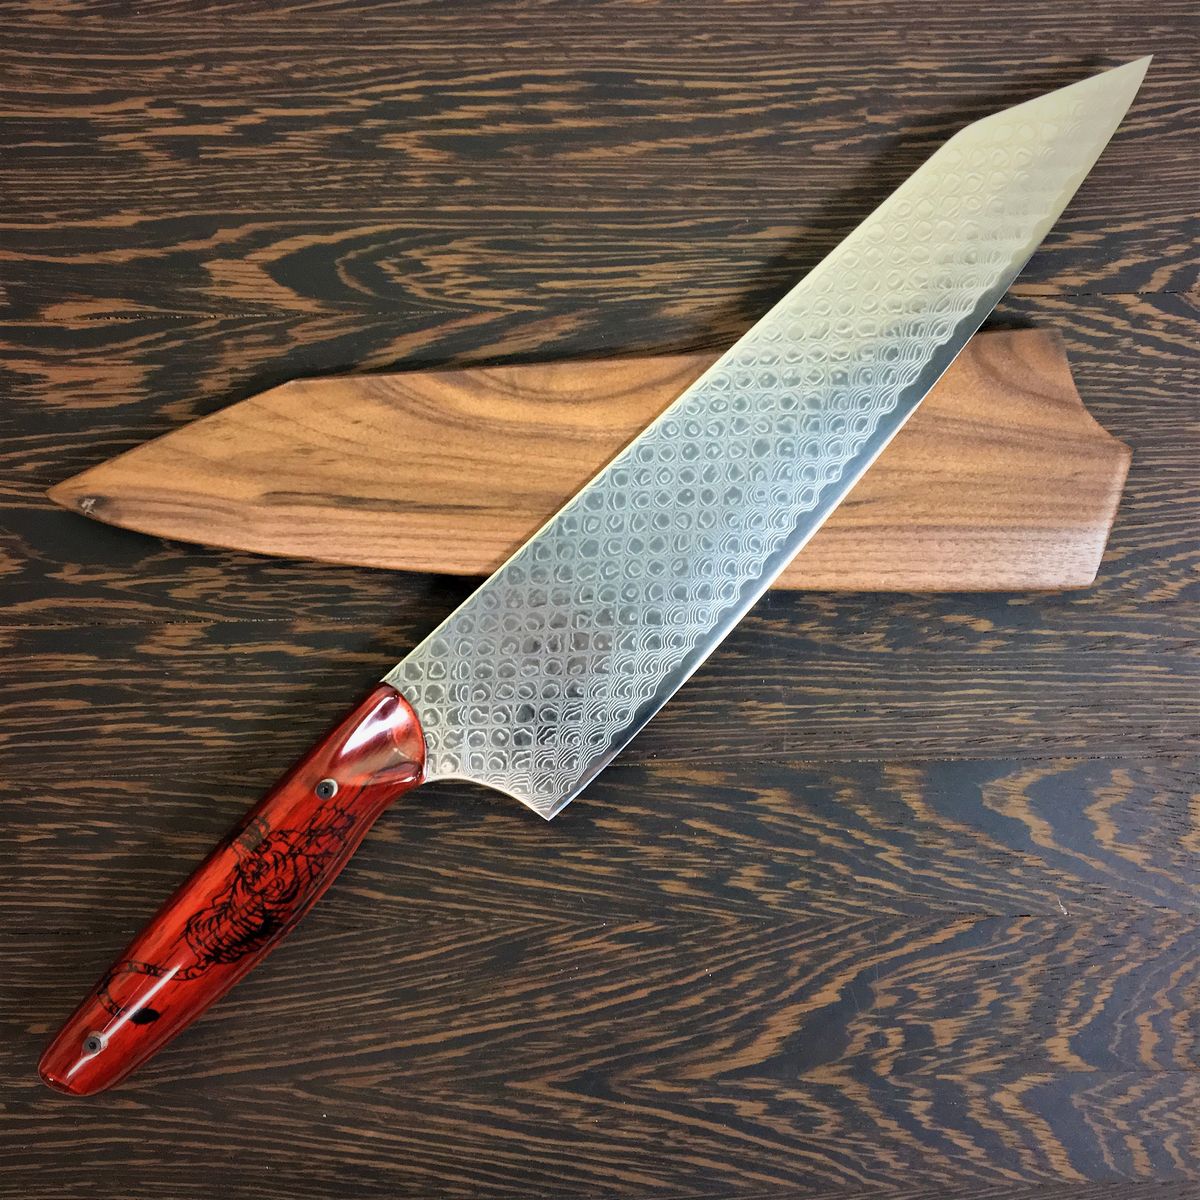 Crouching Tiger Hidden Dragon - Gyuto K-tip 10in Chef's Knife - Japanese Tiger Handle - Dragonscale Damascus